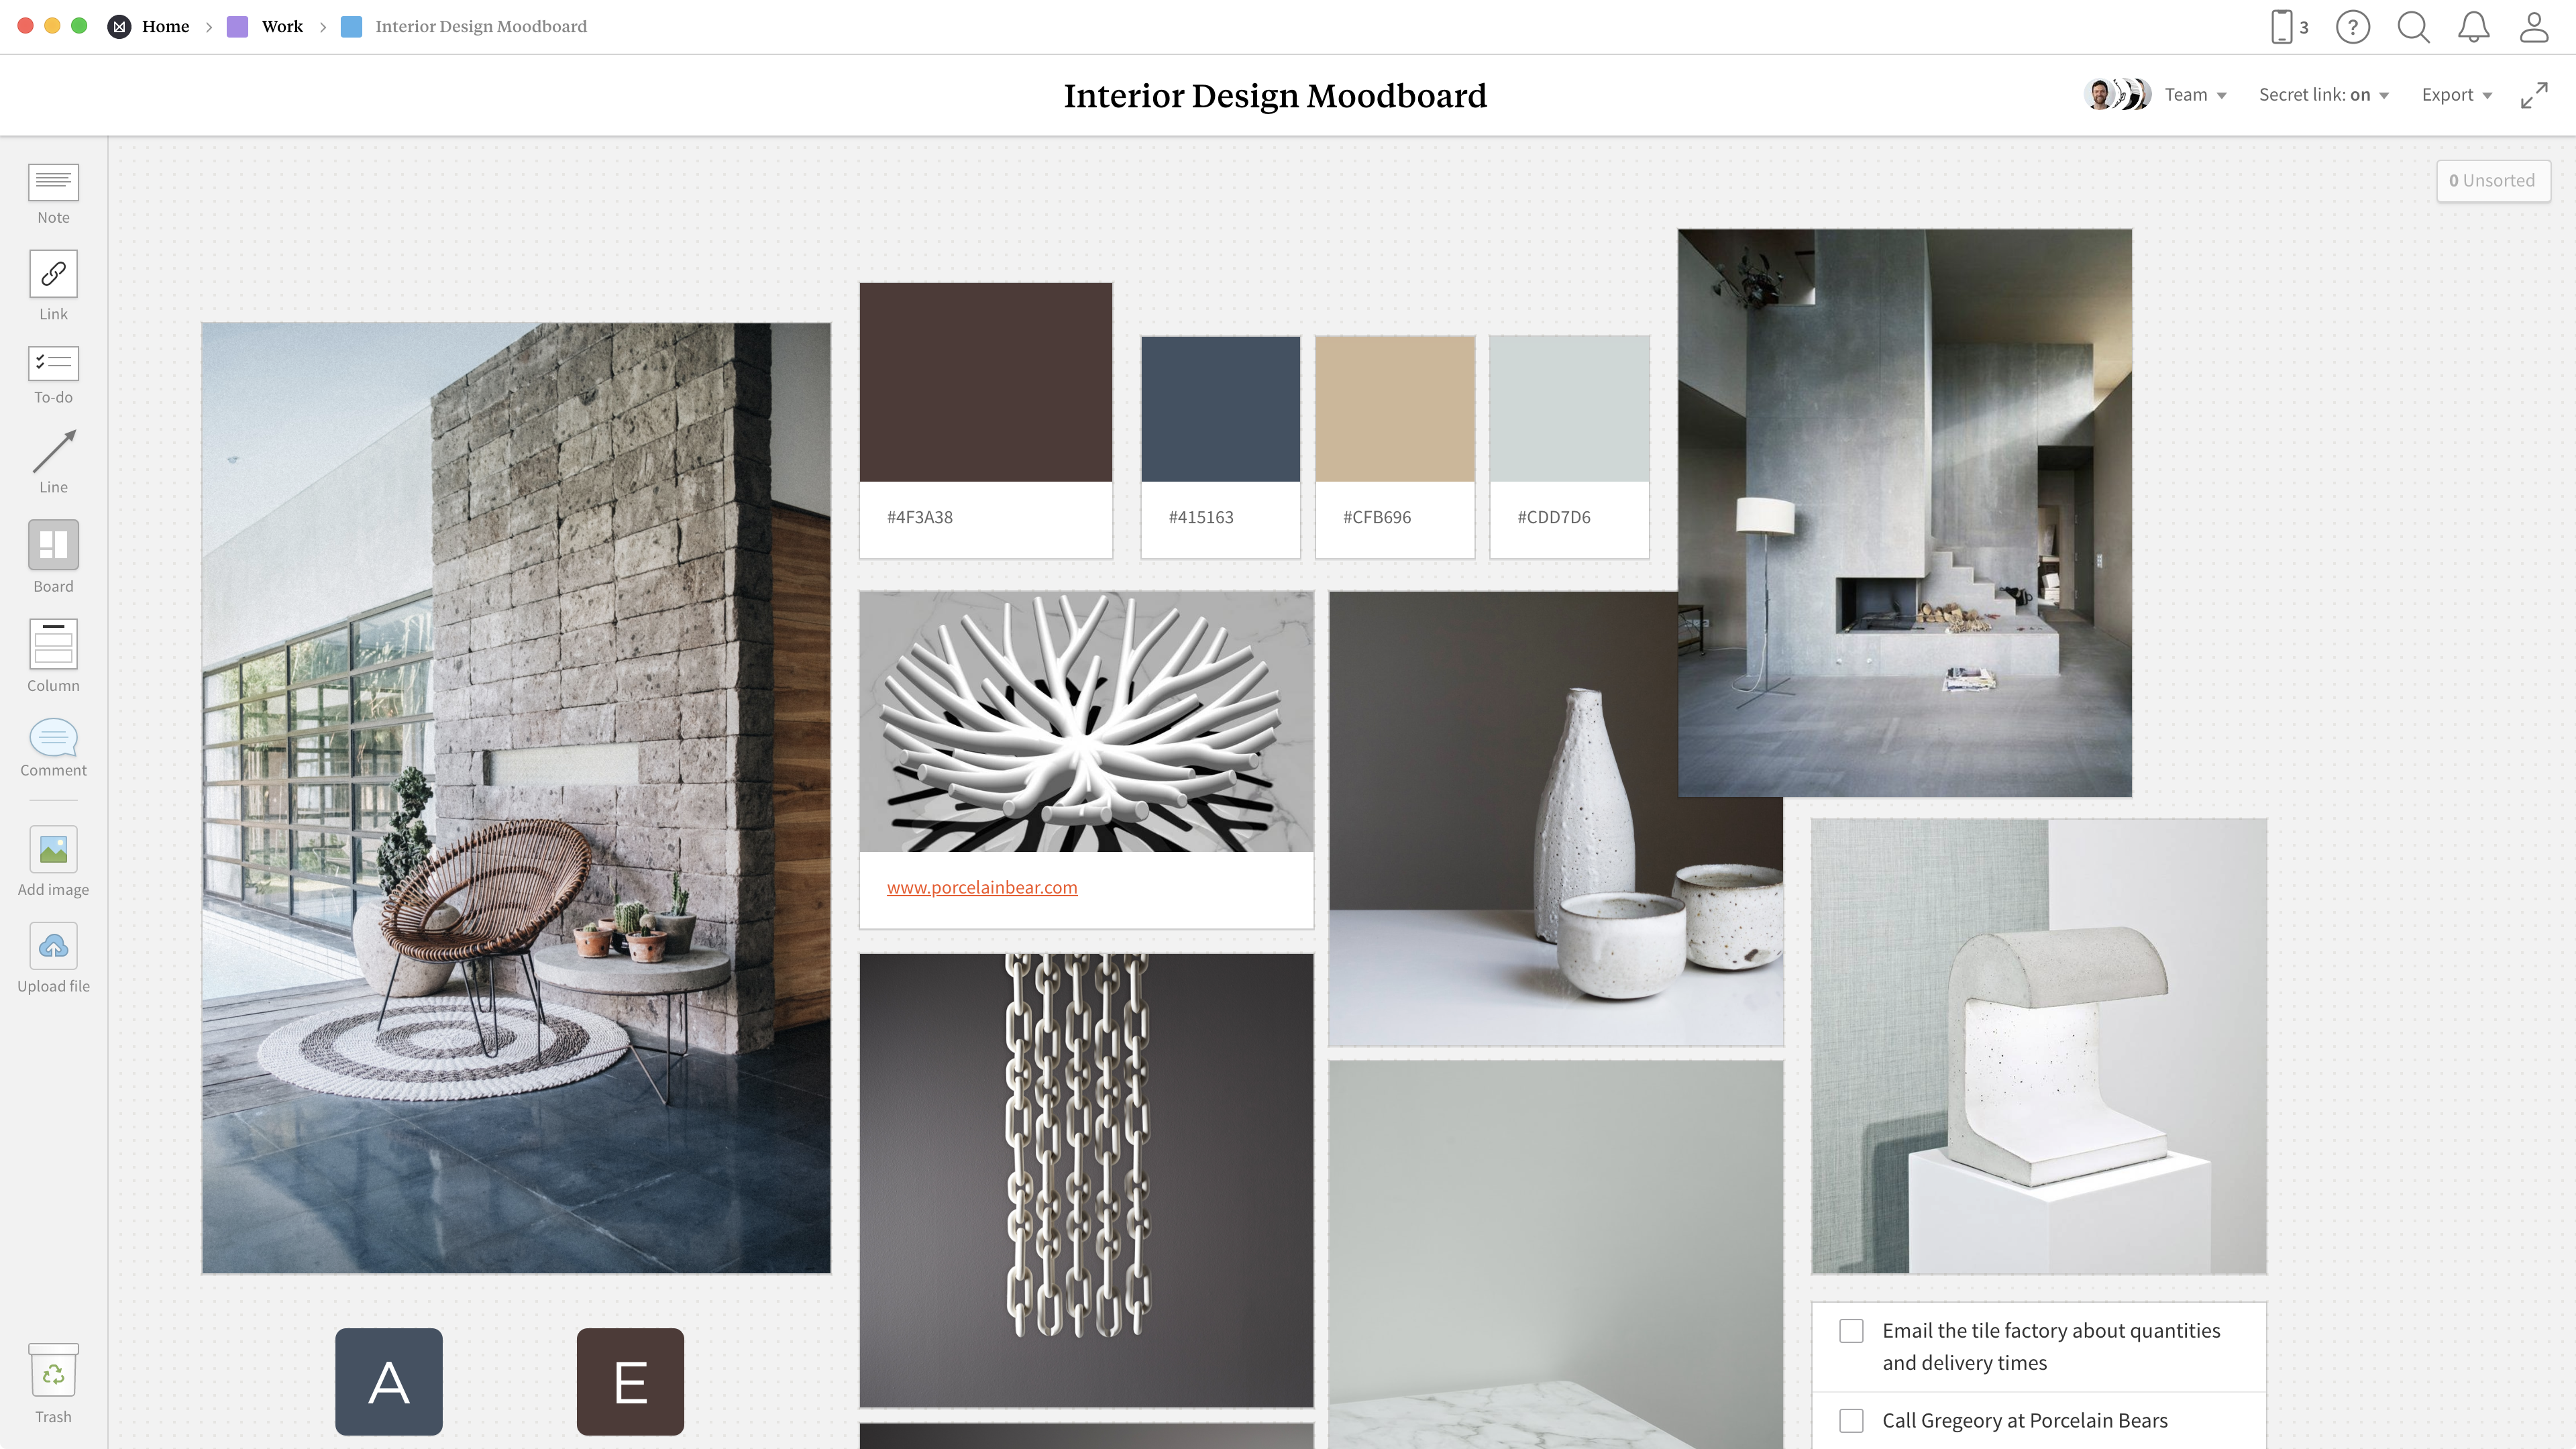 indesign mood board template free